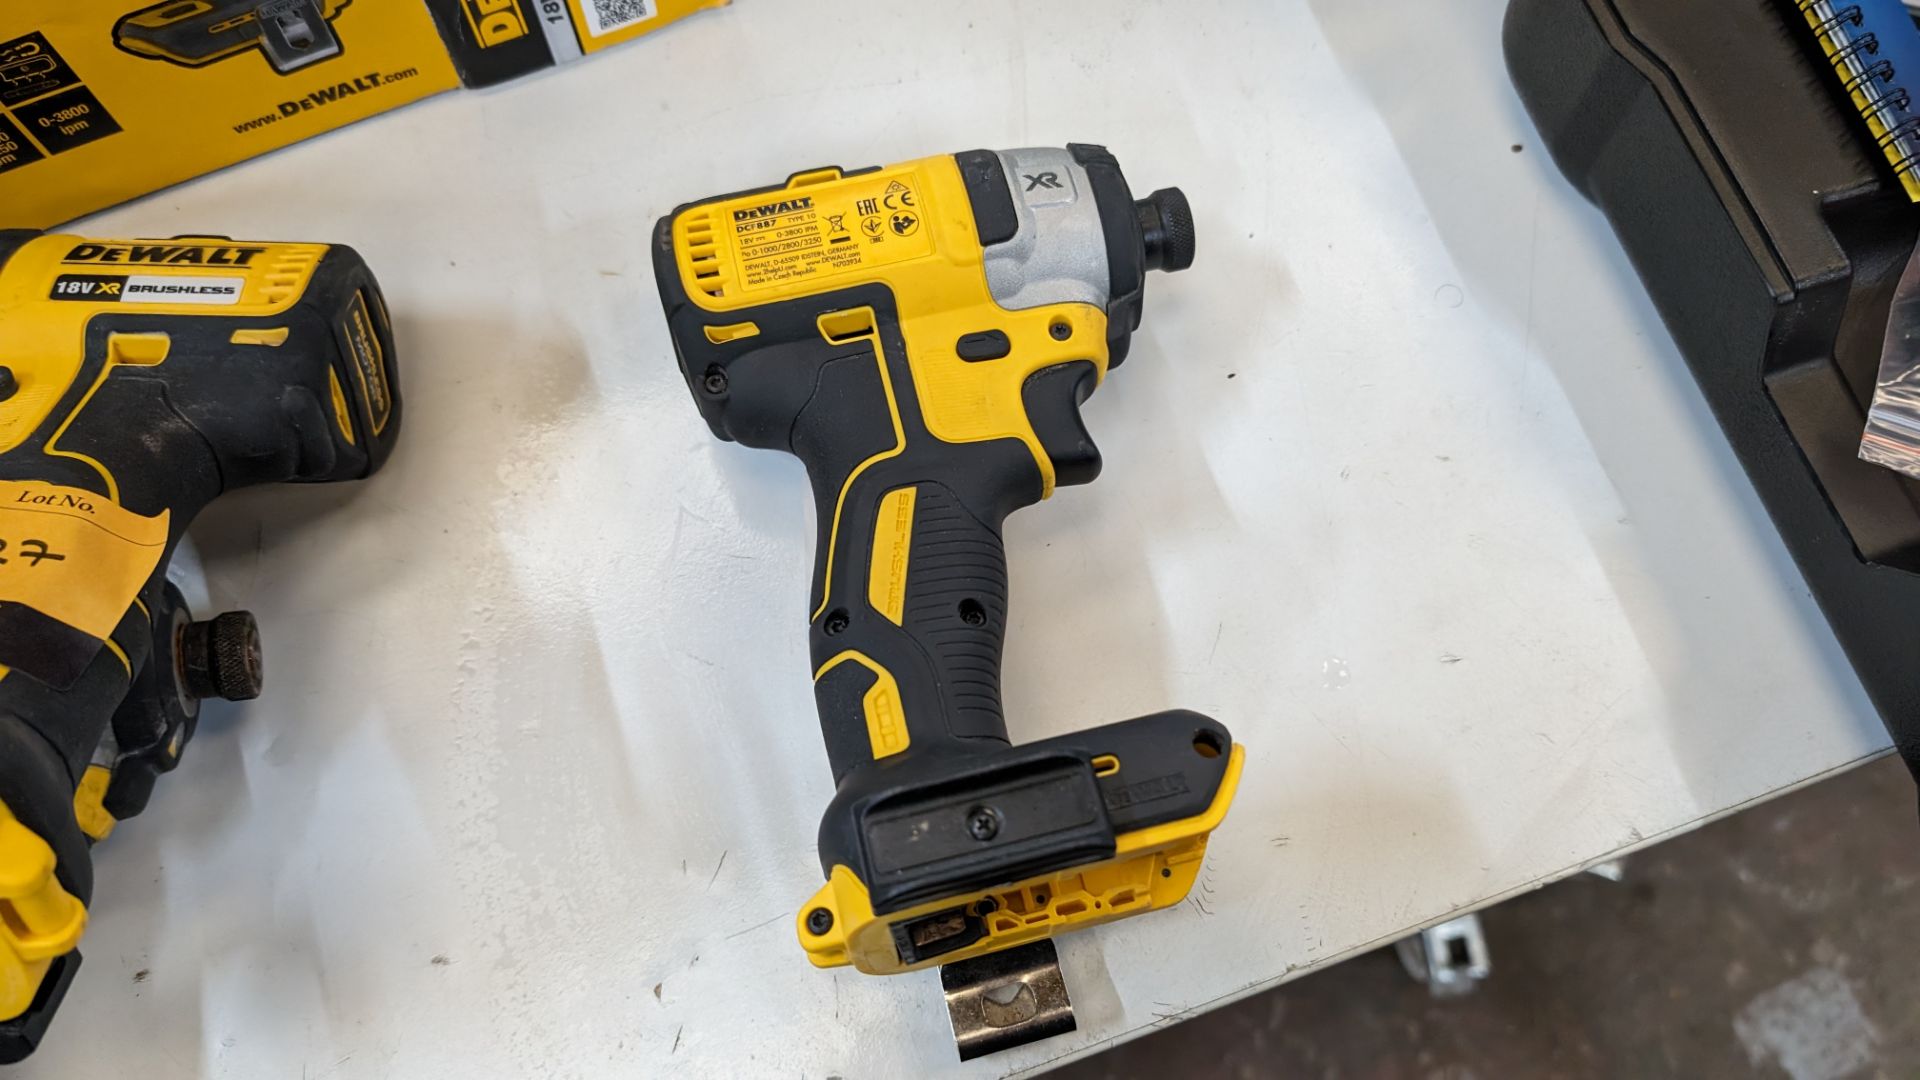 DeWalt DCF887 cordless driver - no battery or charger - Image 4 of 6